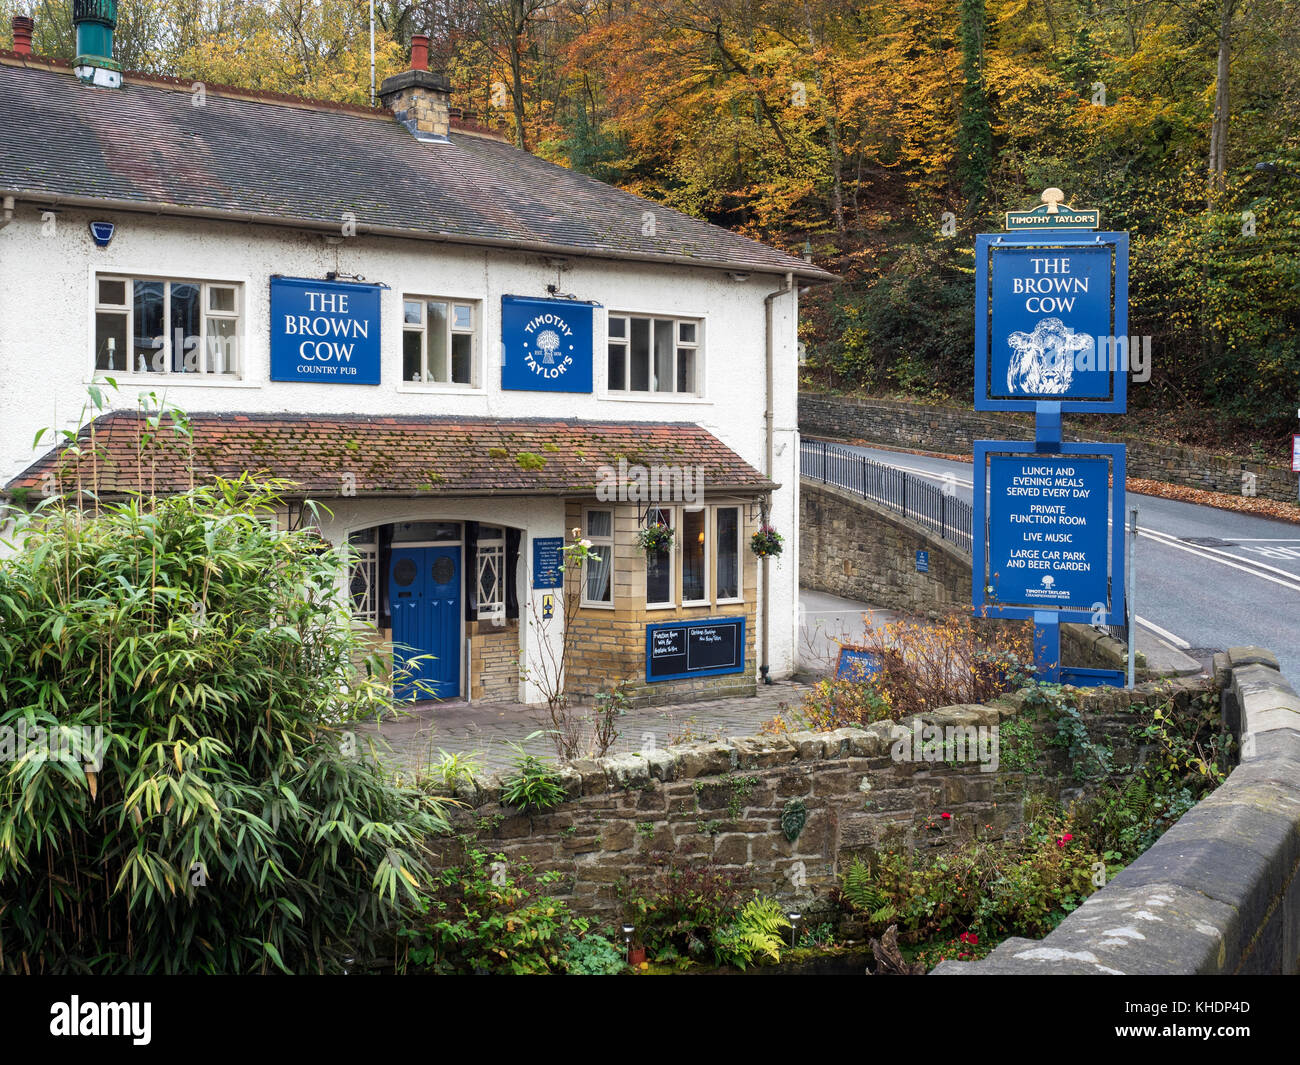 The Brown Cow Pub in Autumn from Ireland Bridge on Harden Road Bingley West Yorkshire England Stock Photo